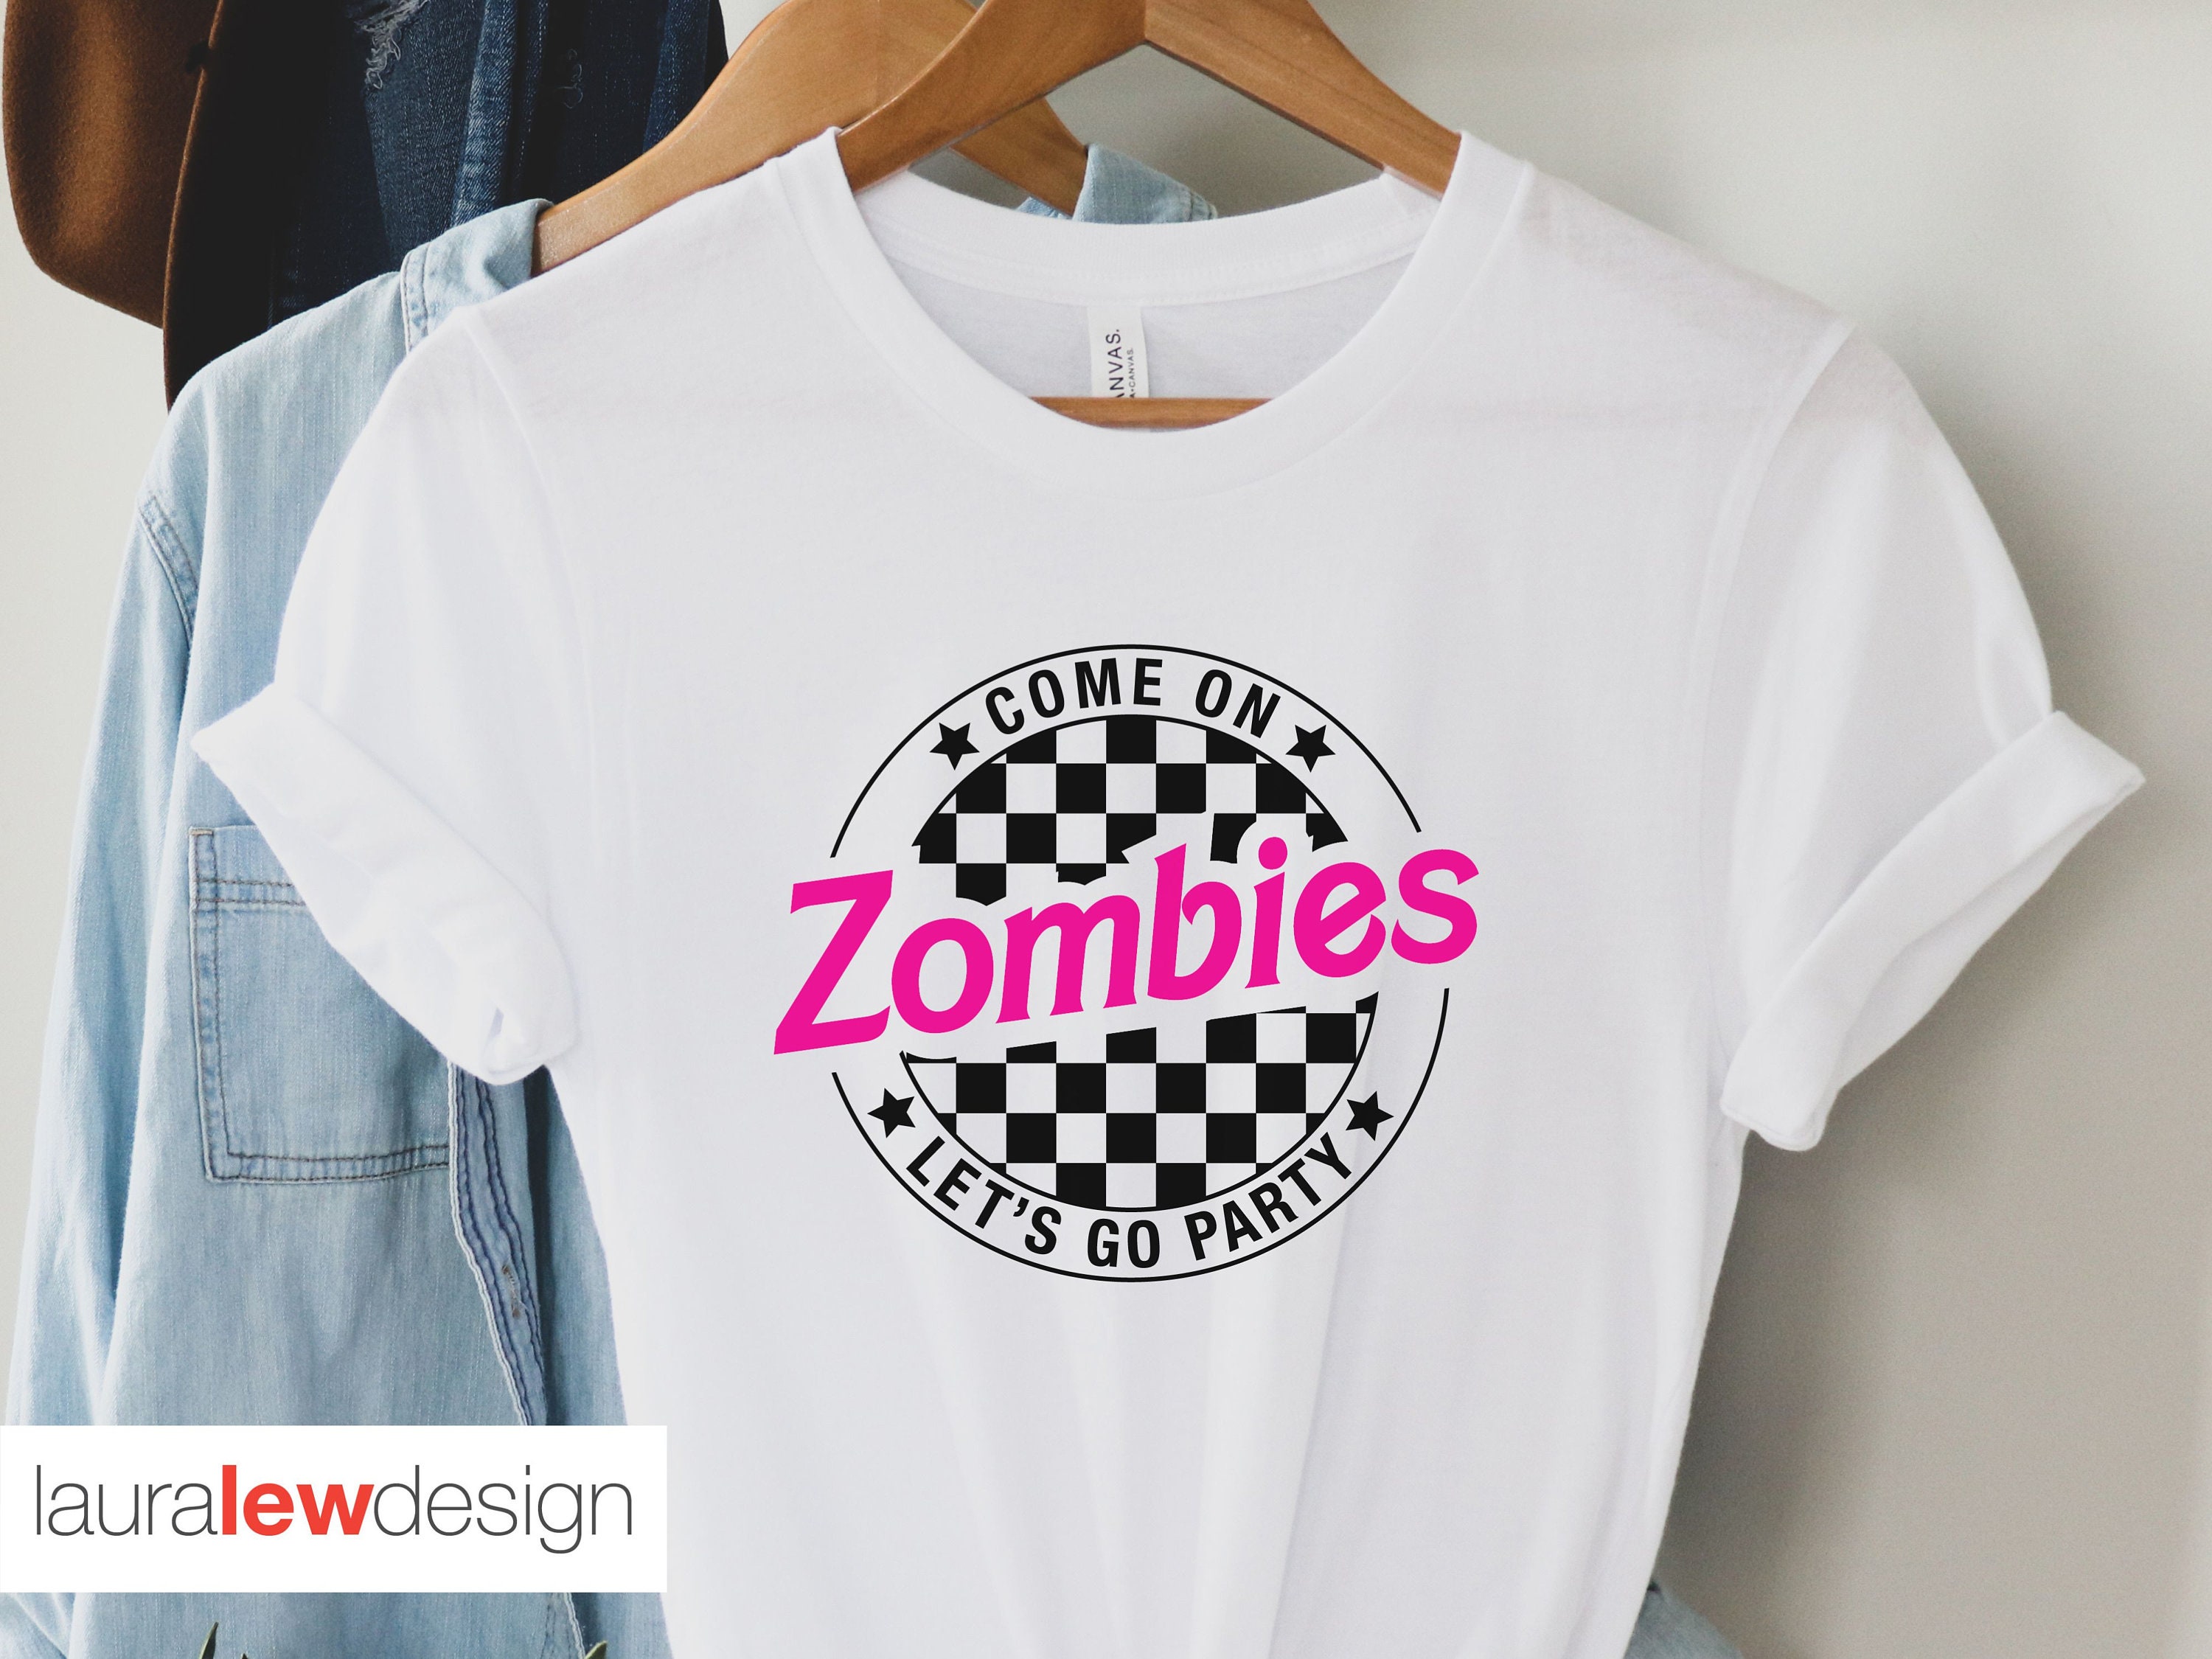 Fighter Joint Graphic Streetwear : korean zombie